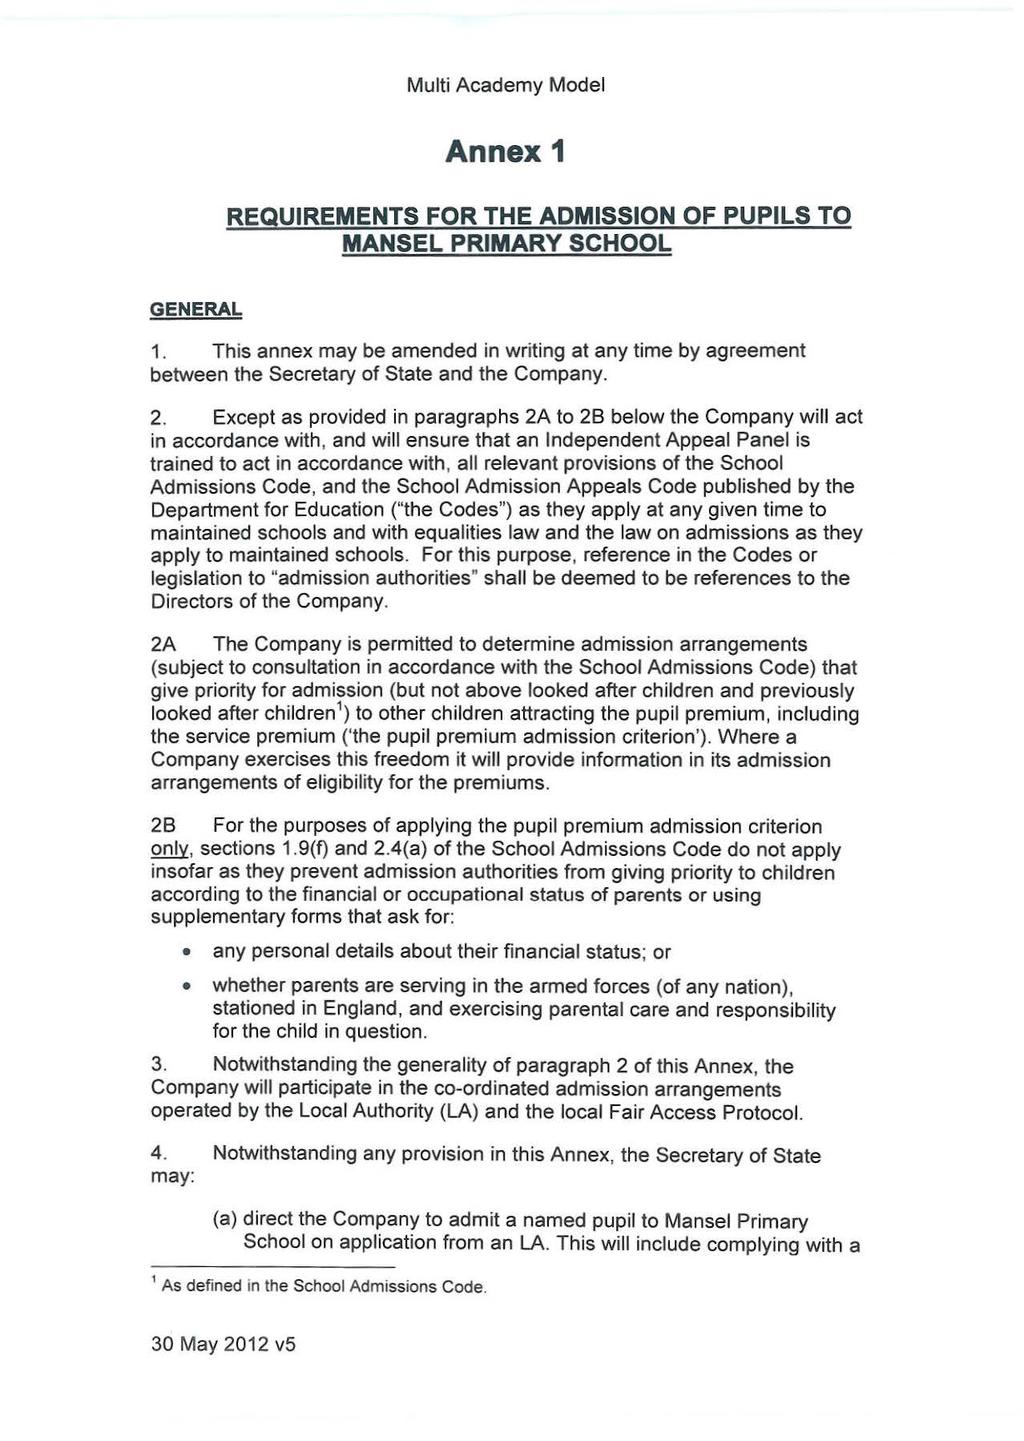 Annex 1 REQUIREMENTS FOR THE ADMISSION OF PUPILS TO MANSEL PRIMARY SCHOOL GENERAL 1. This annex may be amended in writing at any time by agreement between the Secretary of State and the Company. 2.